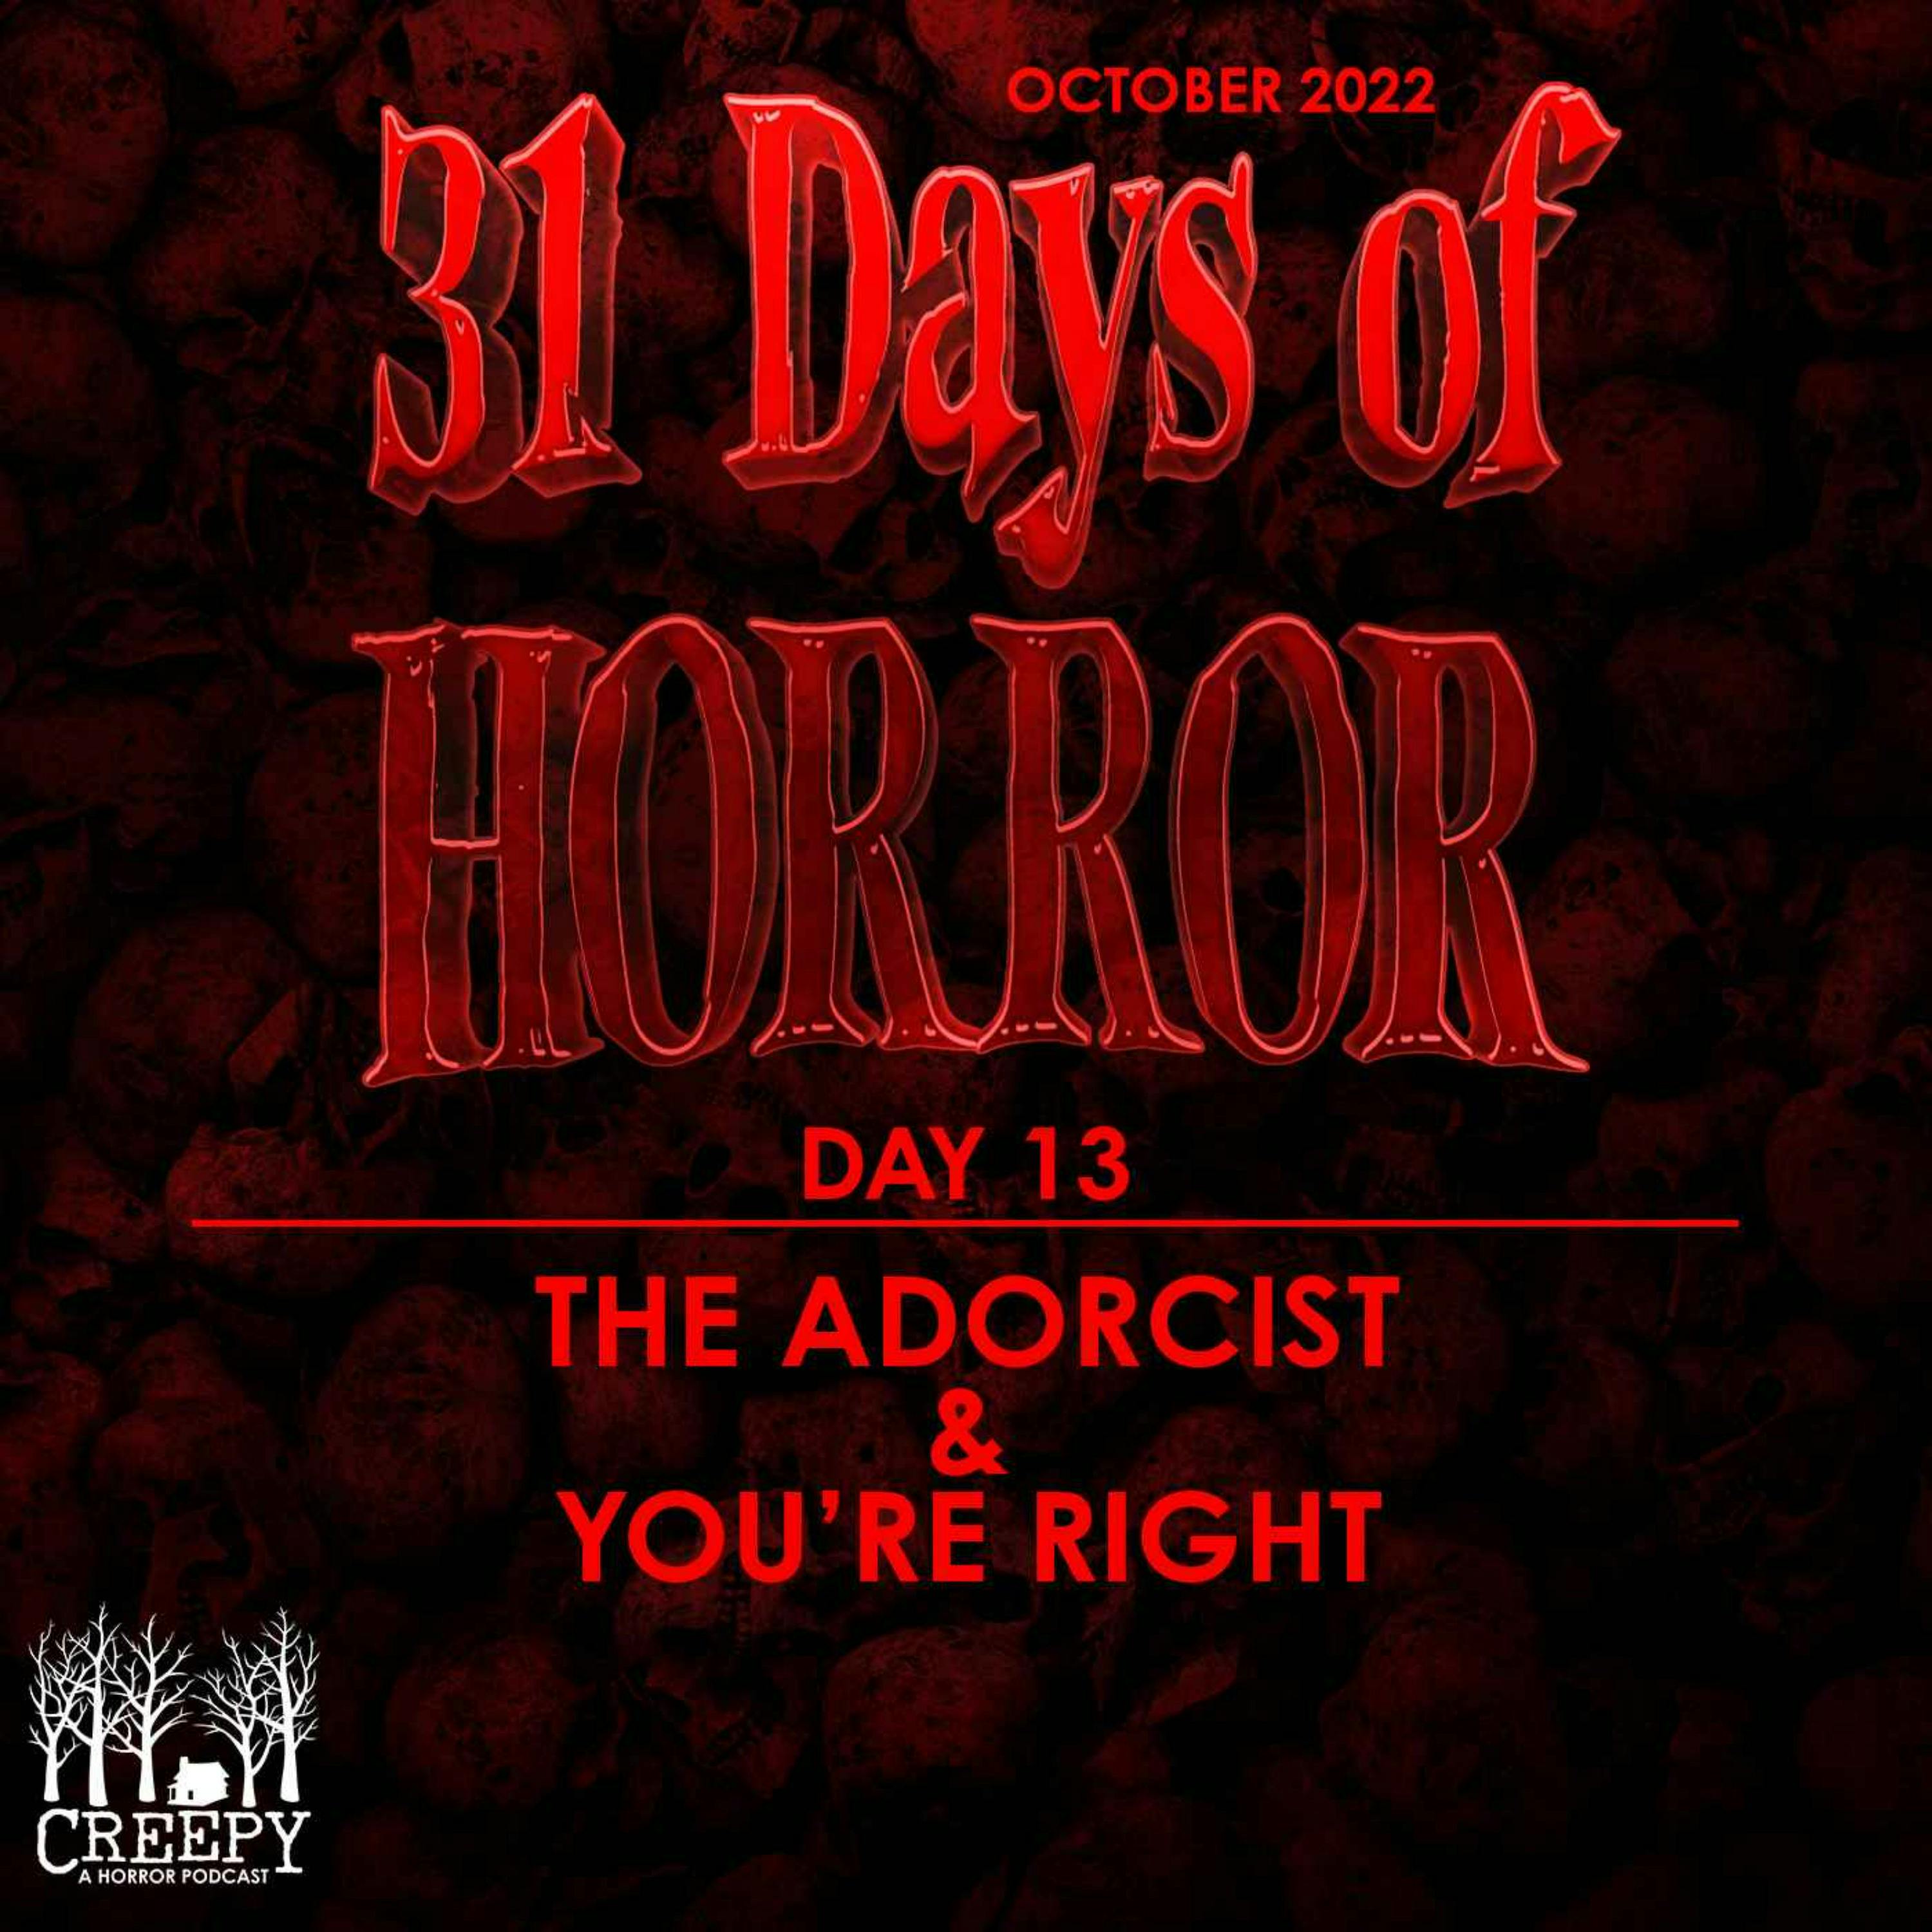 Day 13 - The Adorcist & You’re Right